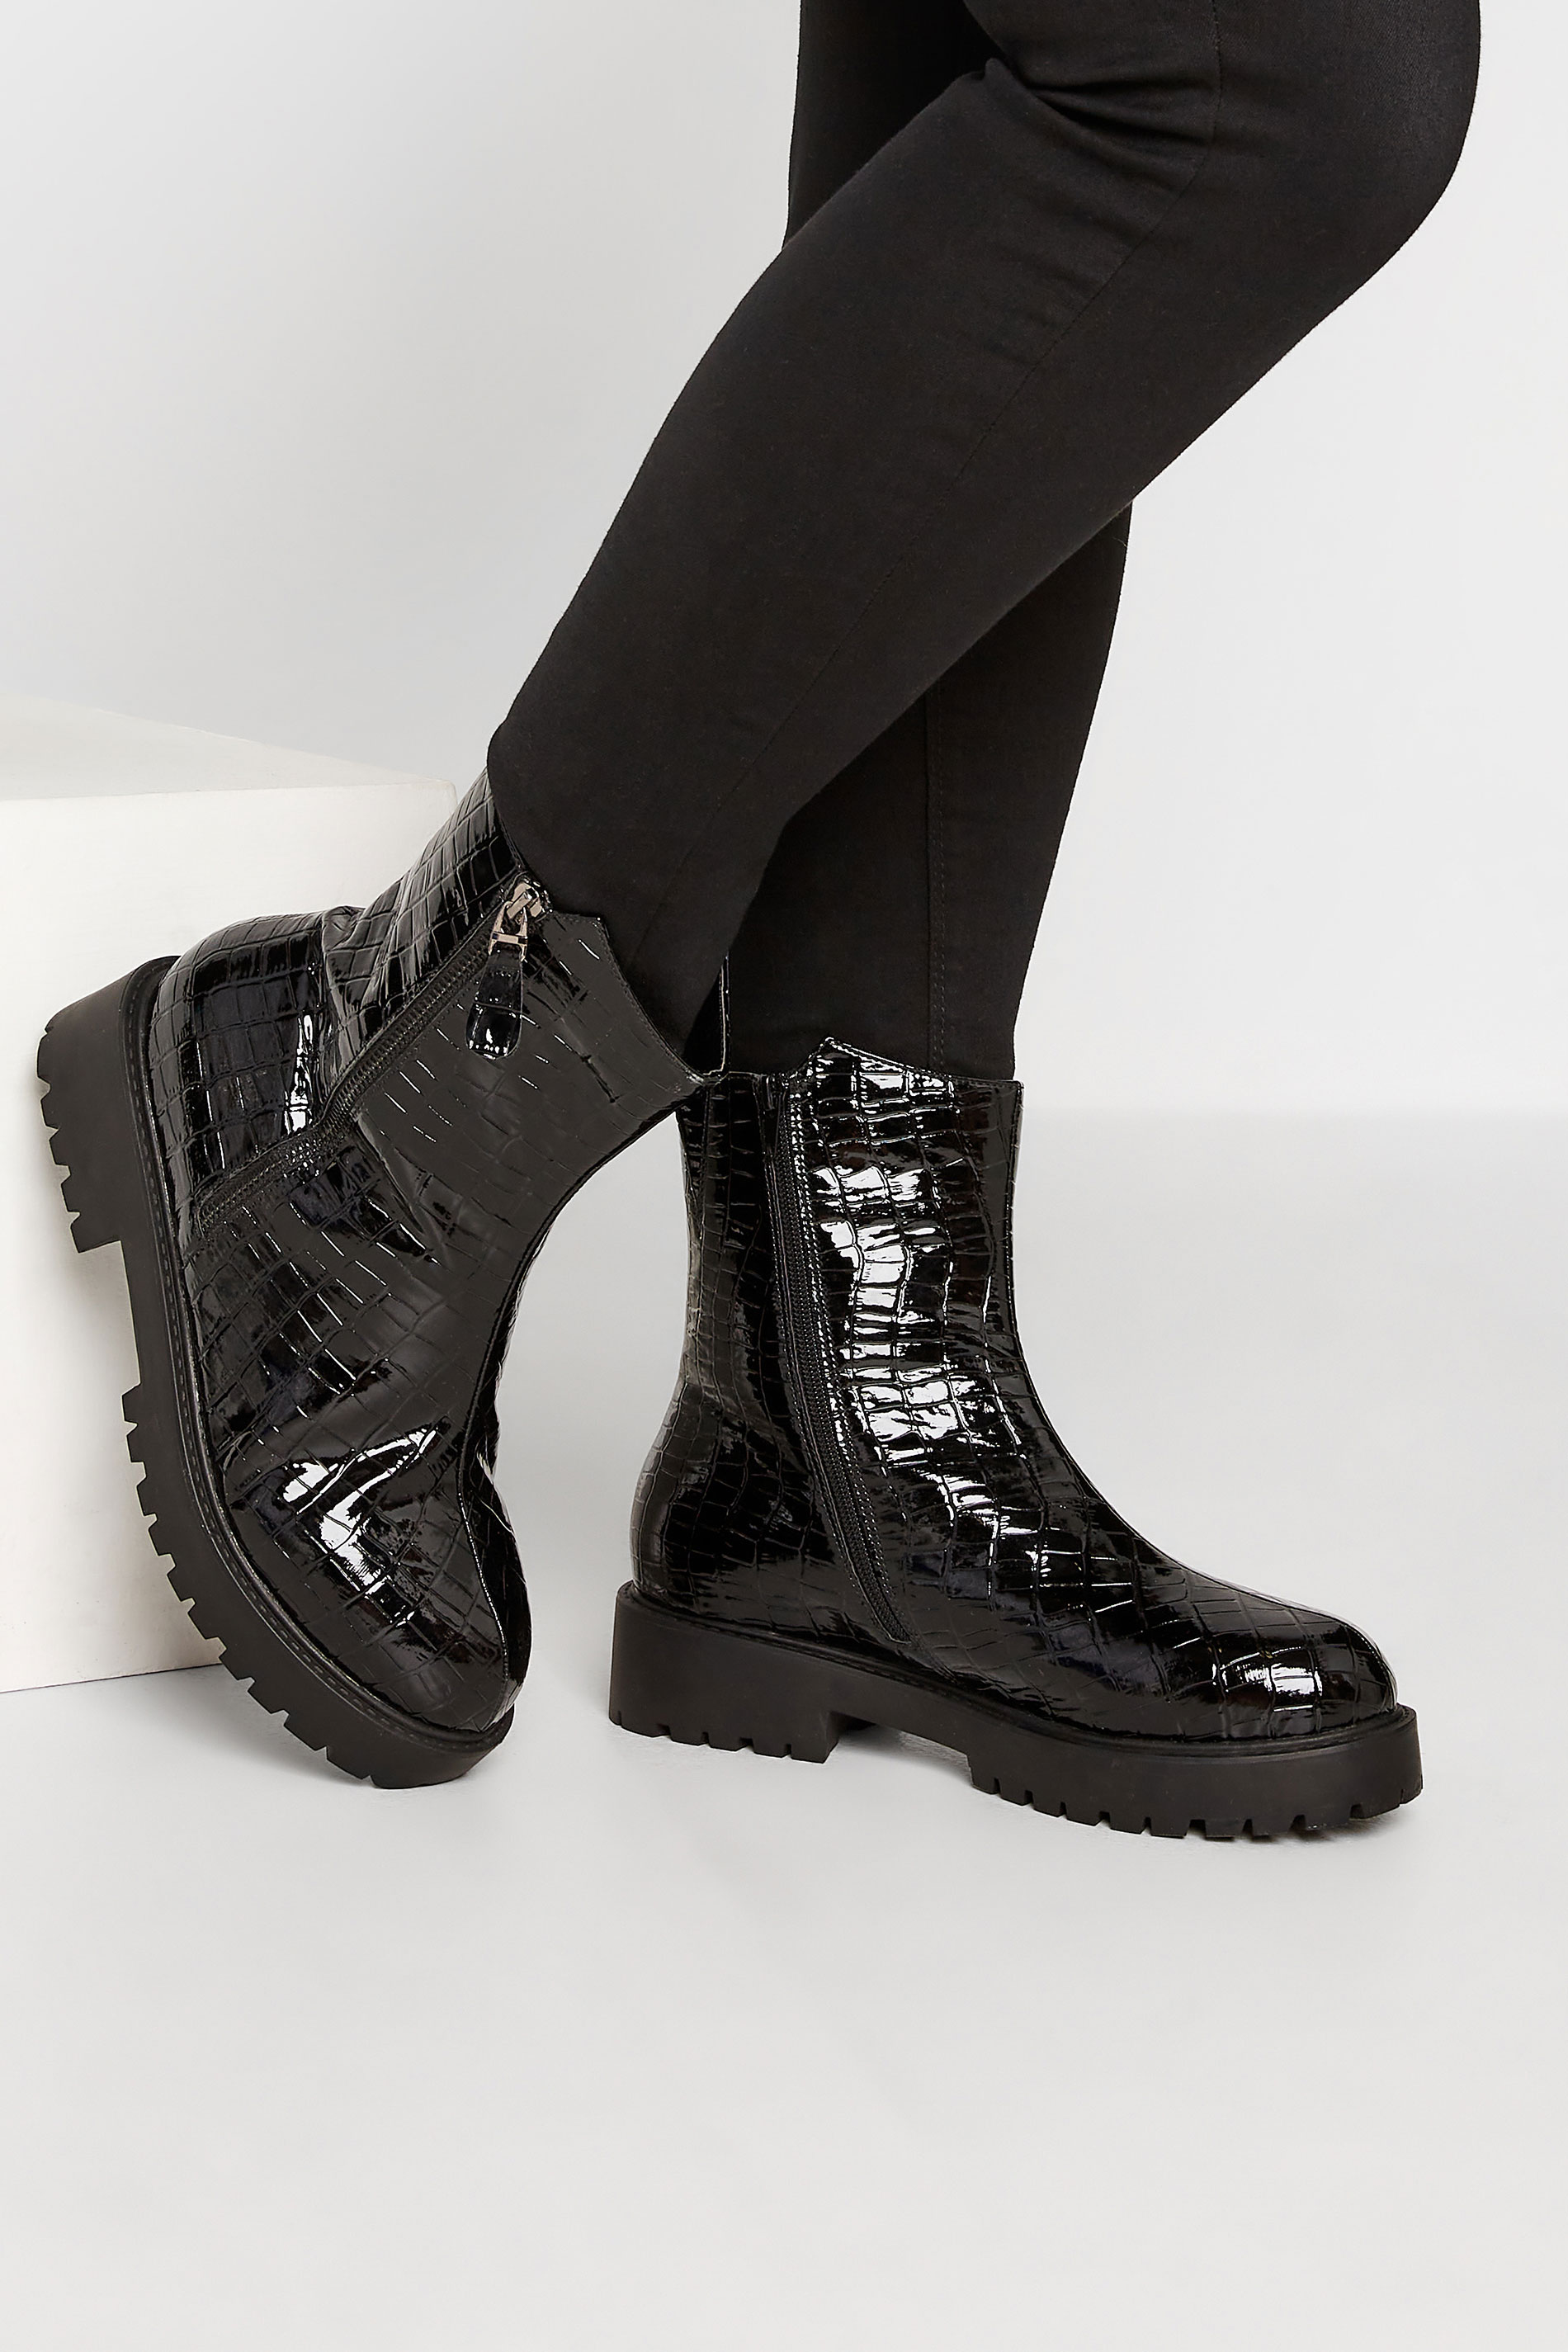 Black Croc Patent Side Zip Boots In Extra Wide EEE Fit 1